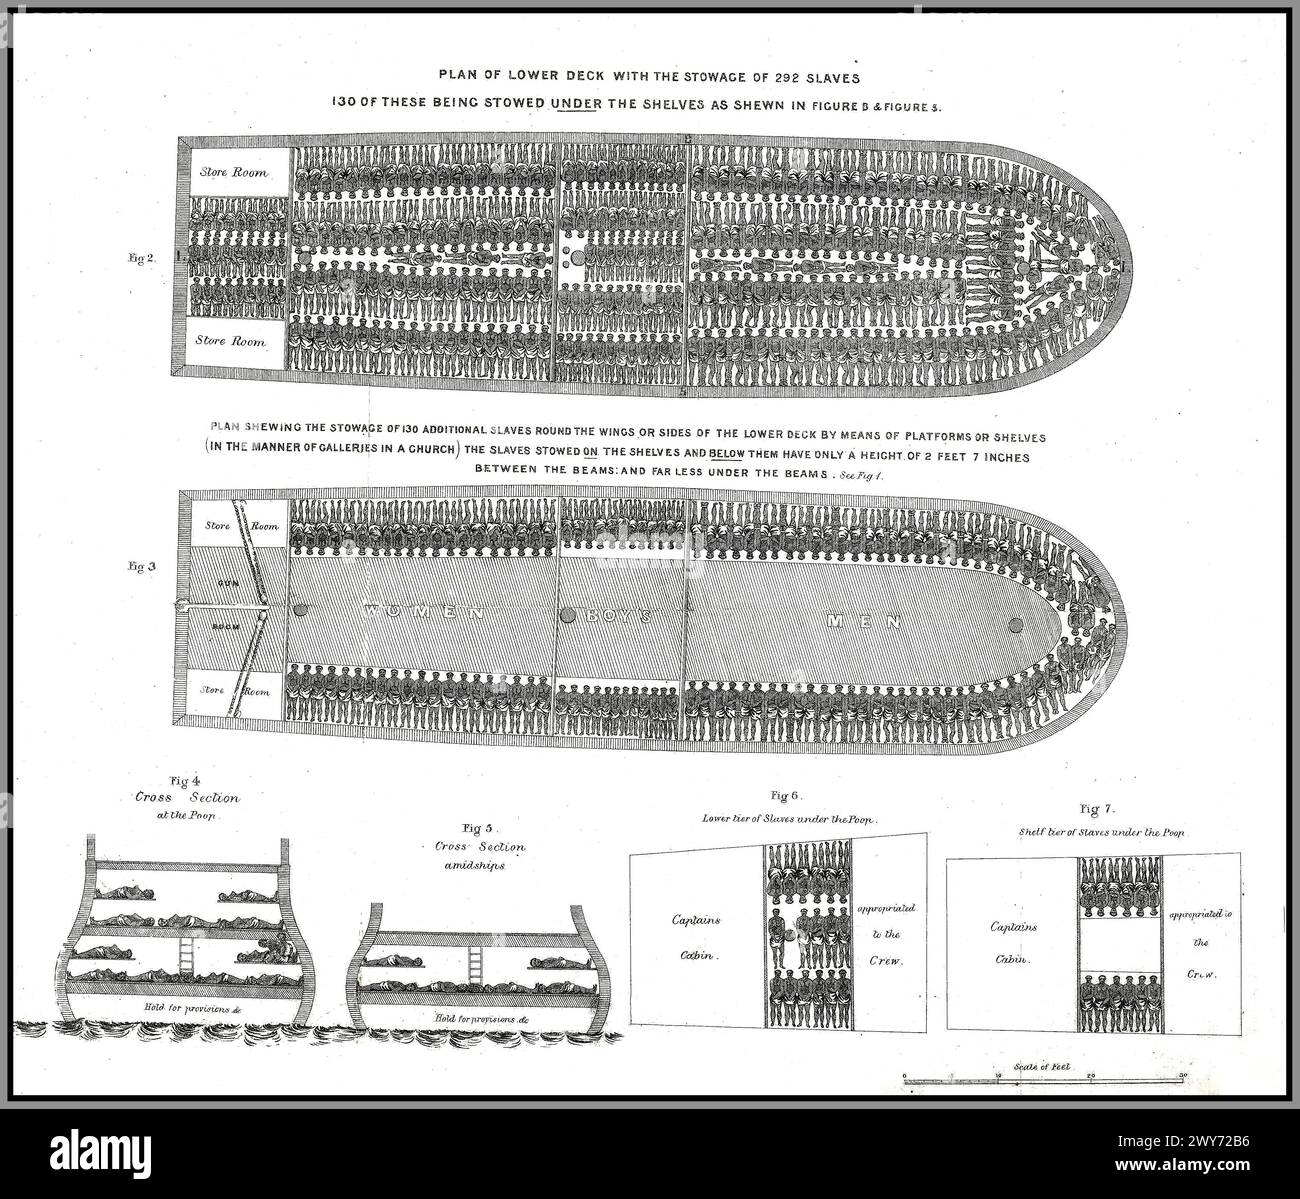 SLAVE SHIP historic illustration of the Liverpool slave ship Brookes dated 1789, . The diagram details the methods of stowage of slaves on the British Liverpool slave ship 'Brookes'. Stock Photo